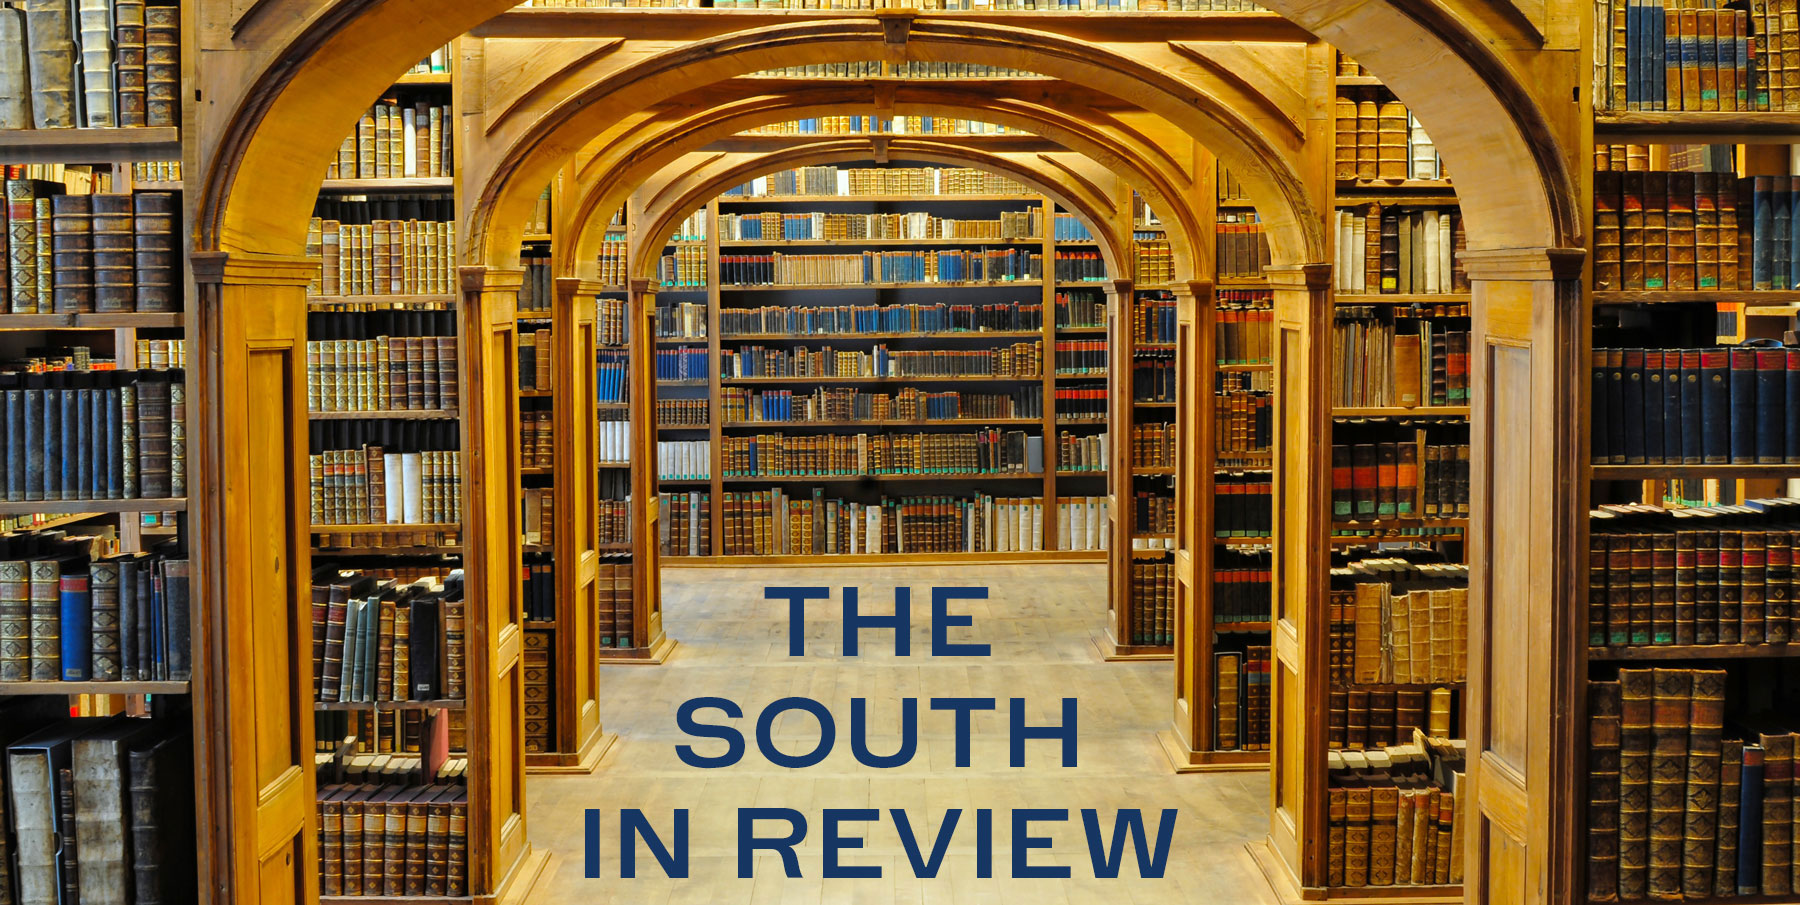 The South in Review